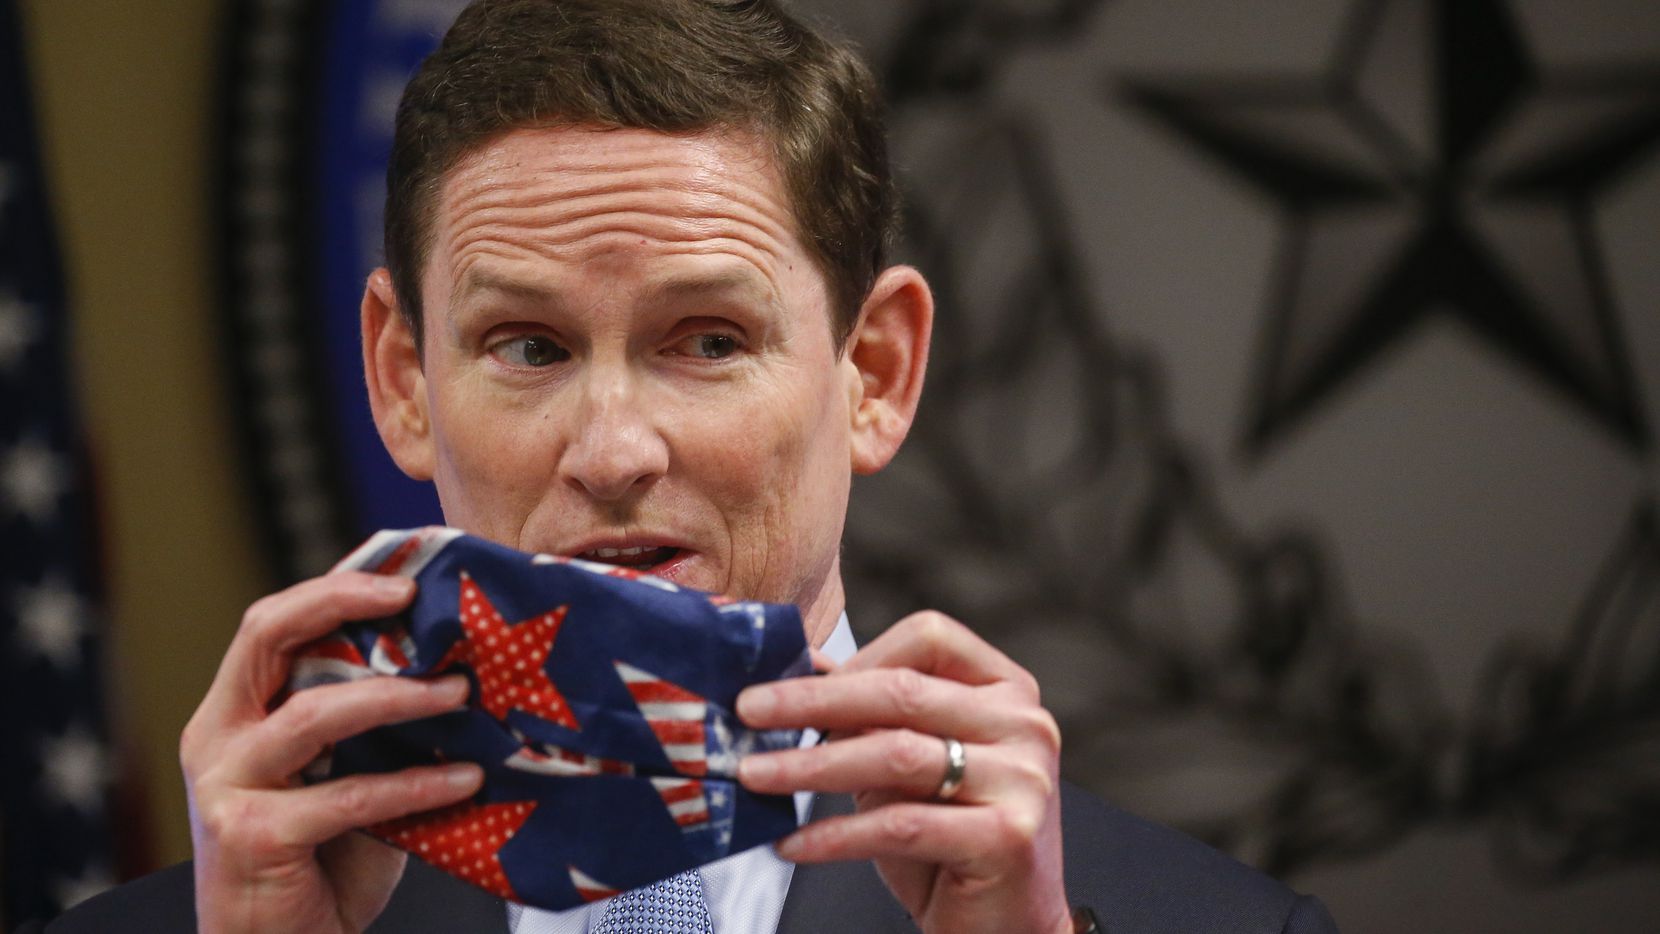 Dallas County Judge Clay Jenkins displays an improvised cloth face mask made with a bandana...